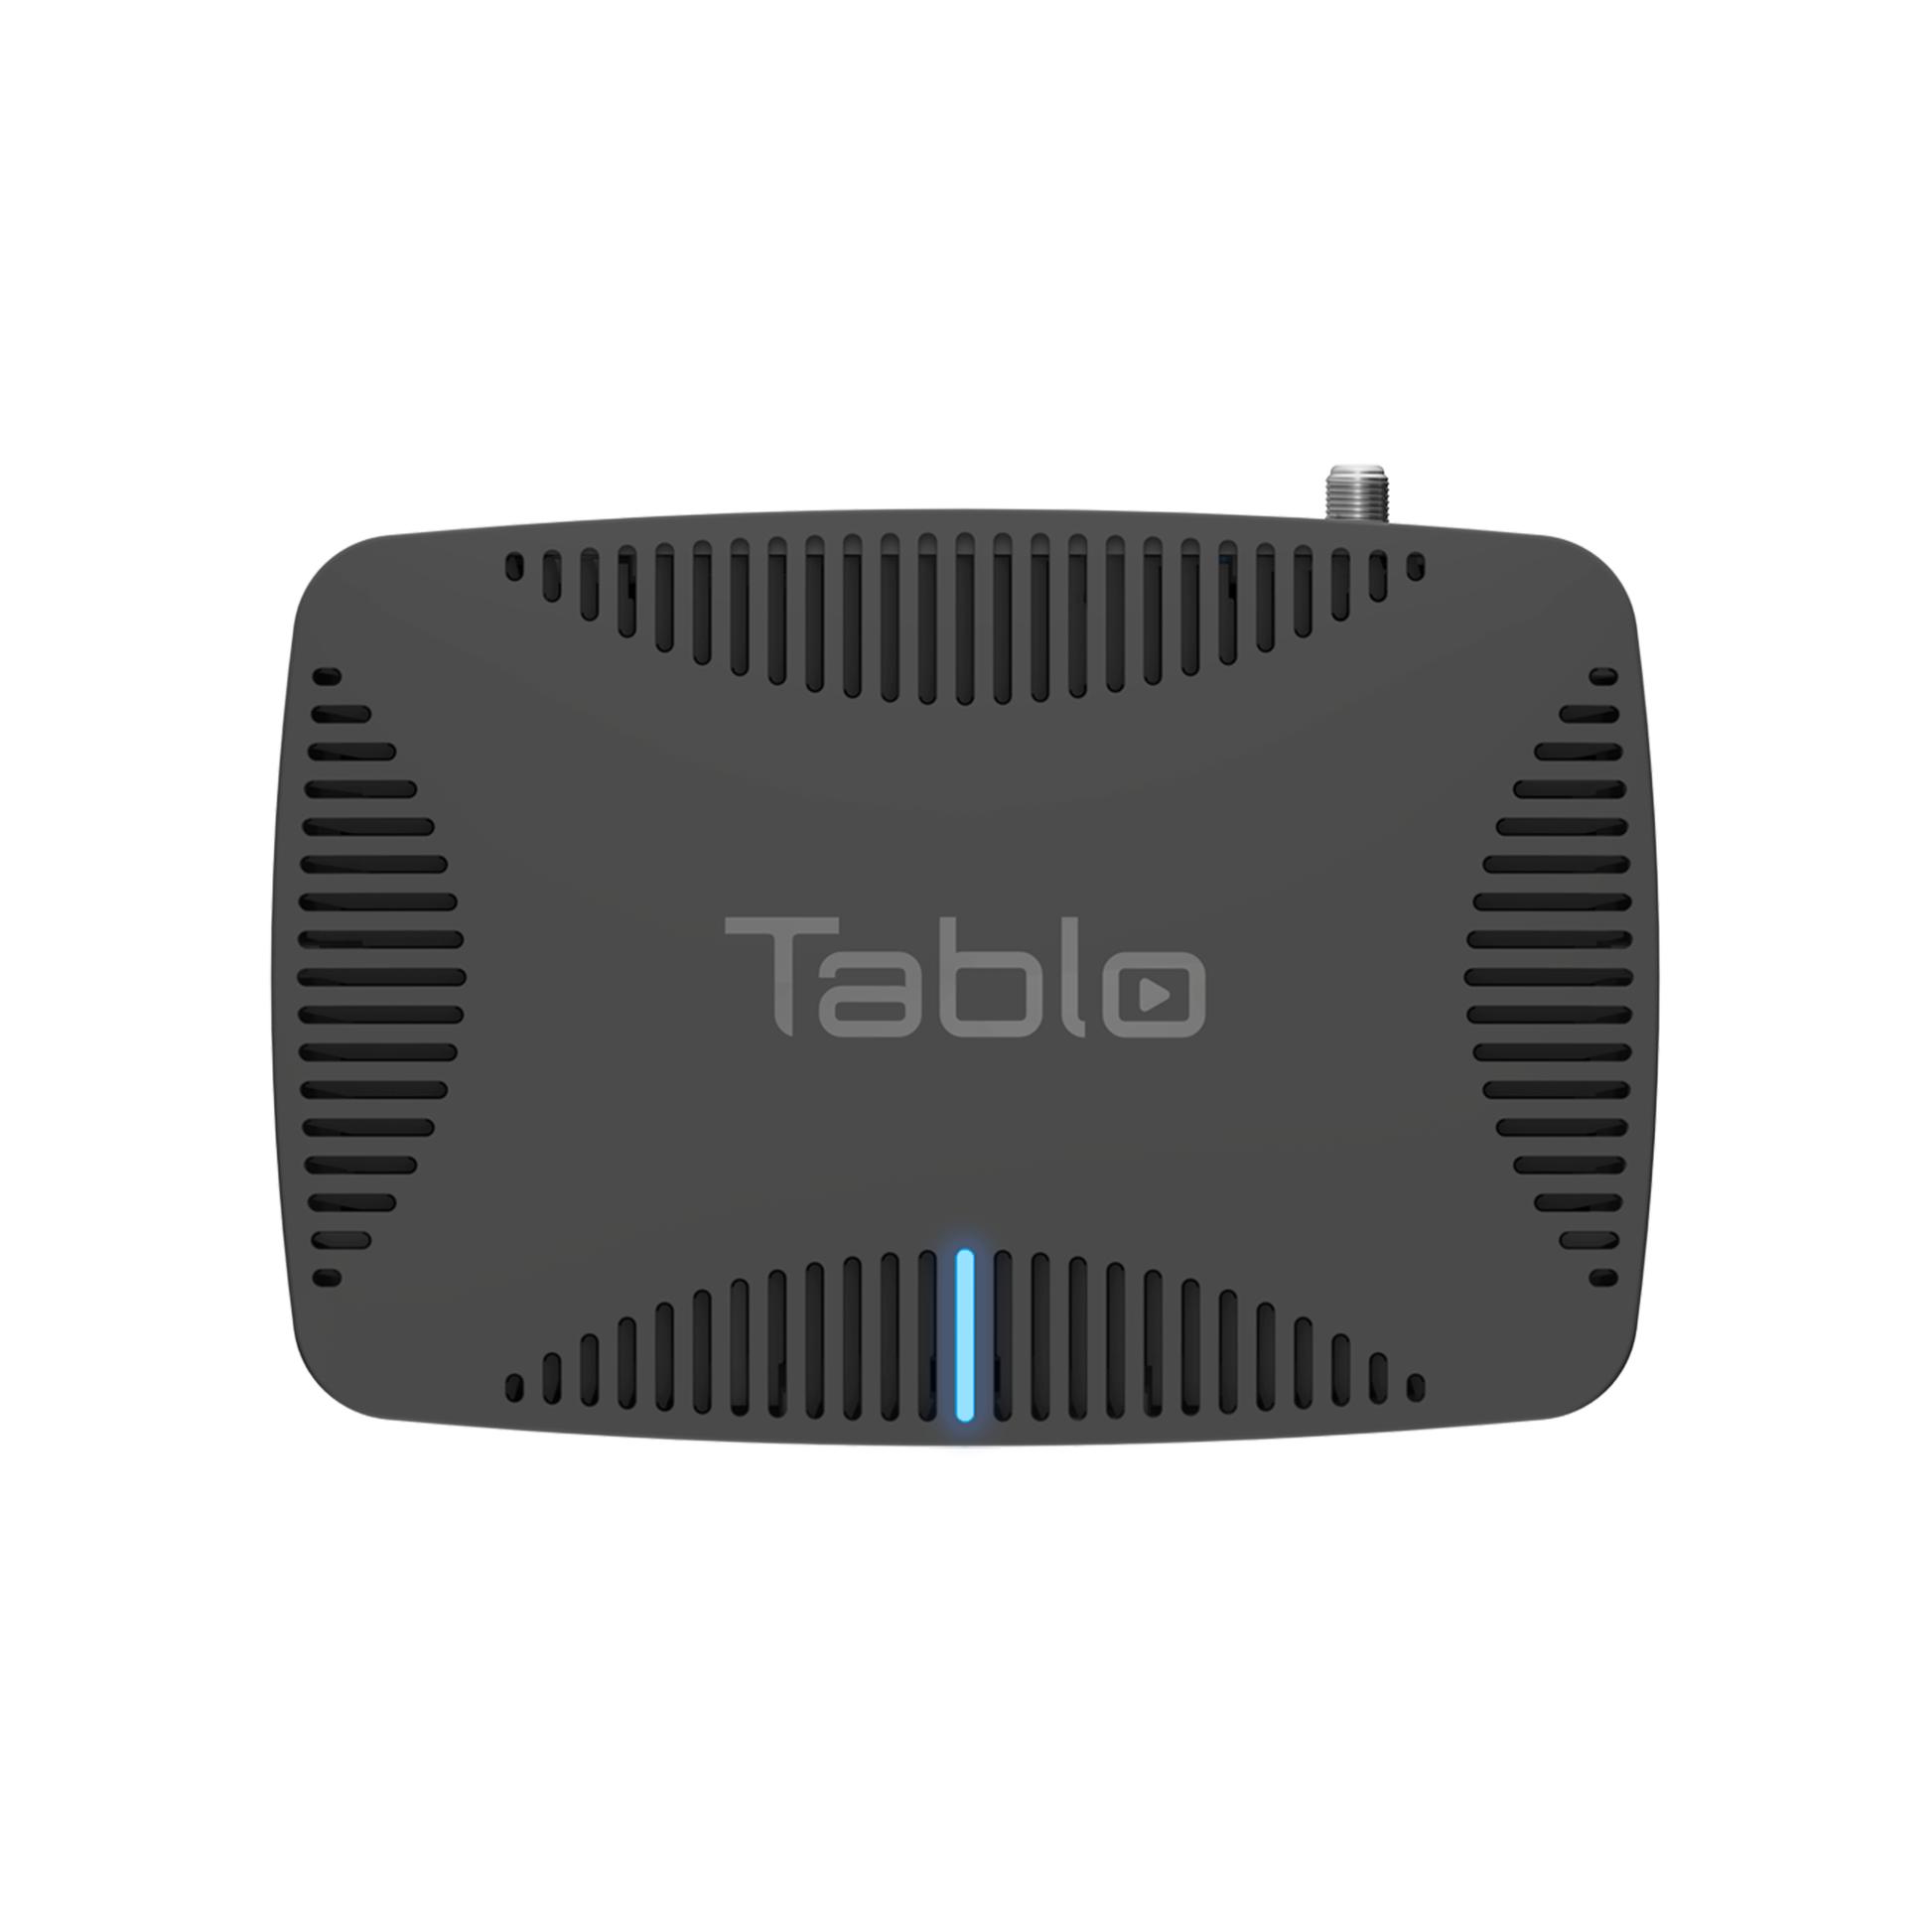 Tablo QUAD Over-The-Air (OTA) DVR (Digital Video Recorder) for Cord Cutters. DVR hardware, top view.